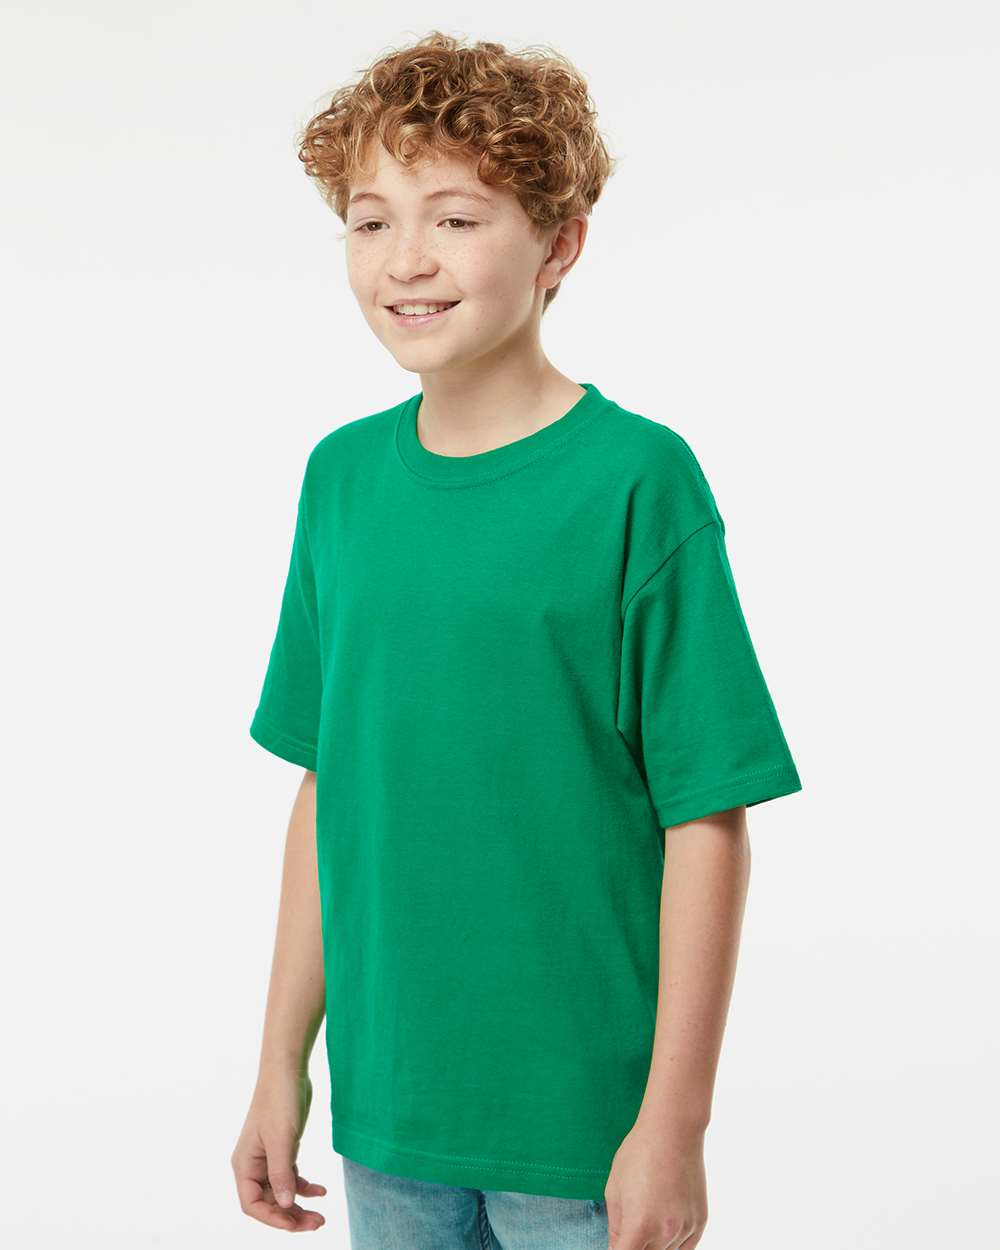 M&O Youth Gold Soft Touch T-Shirt 4850 #colormdl_Fine Kelly Green